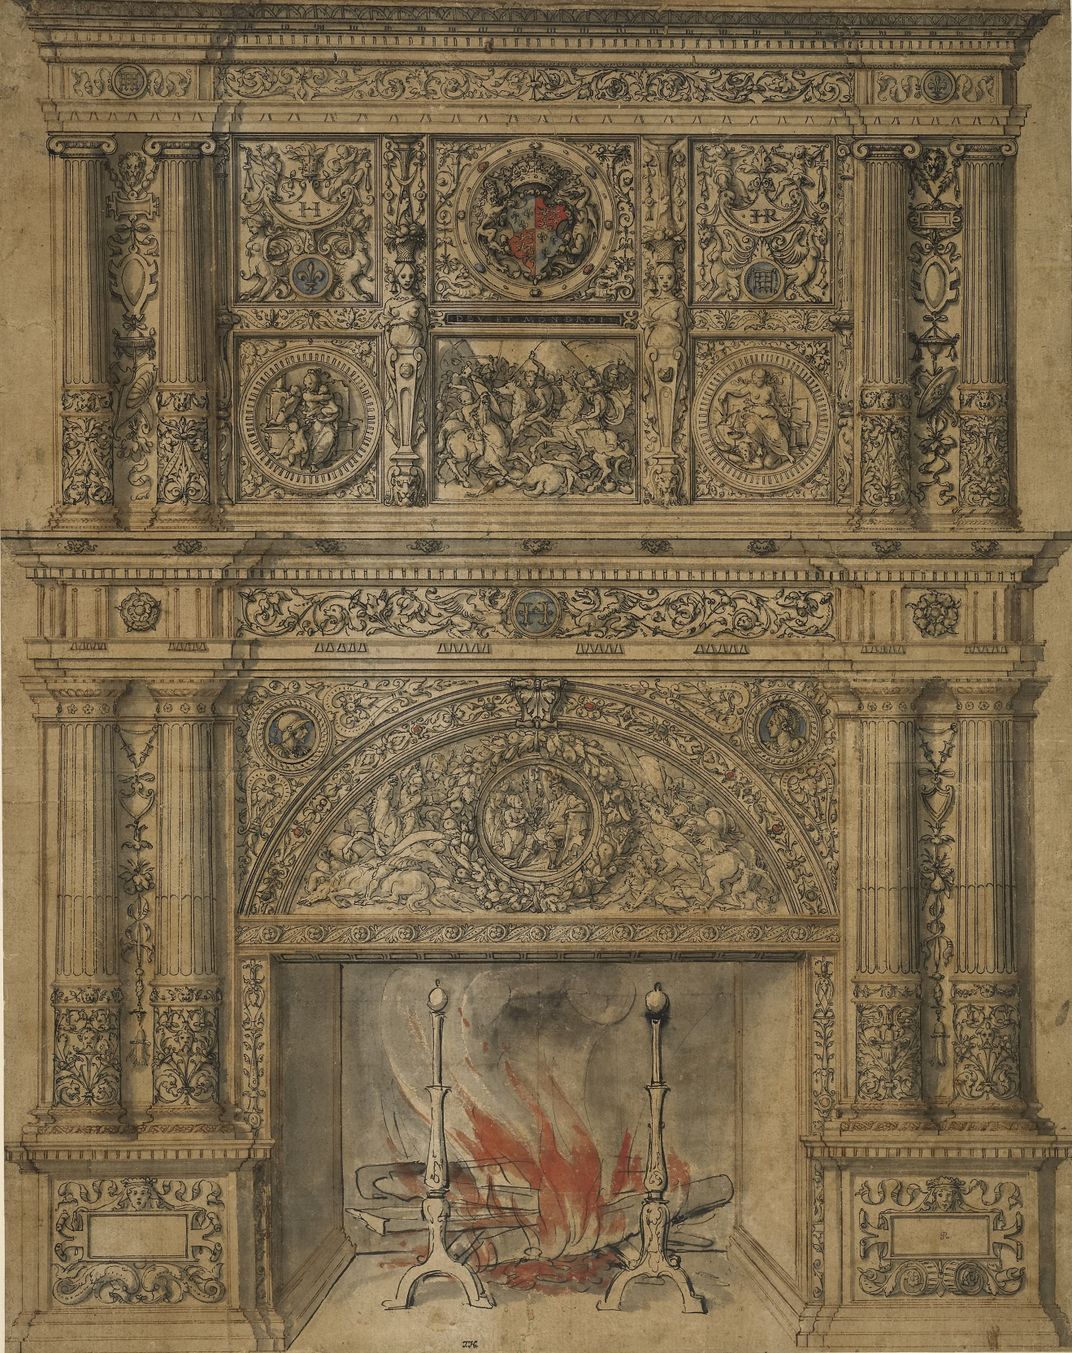 Hans Holbein the Younger, Design for a Chimneypiece, circa 1537–1543